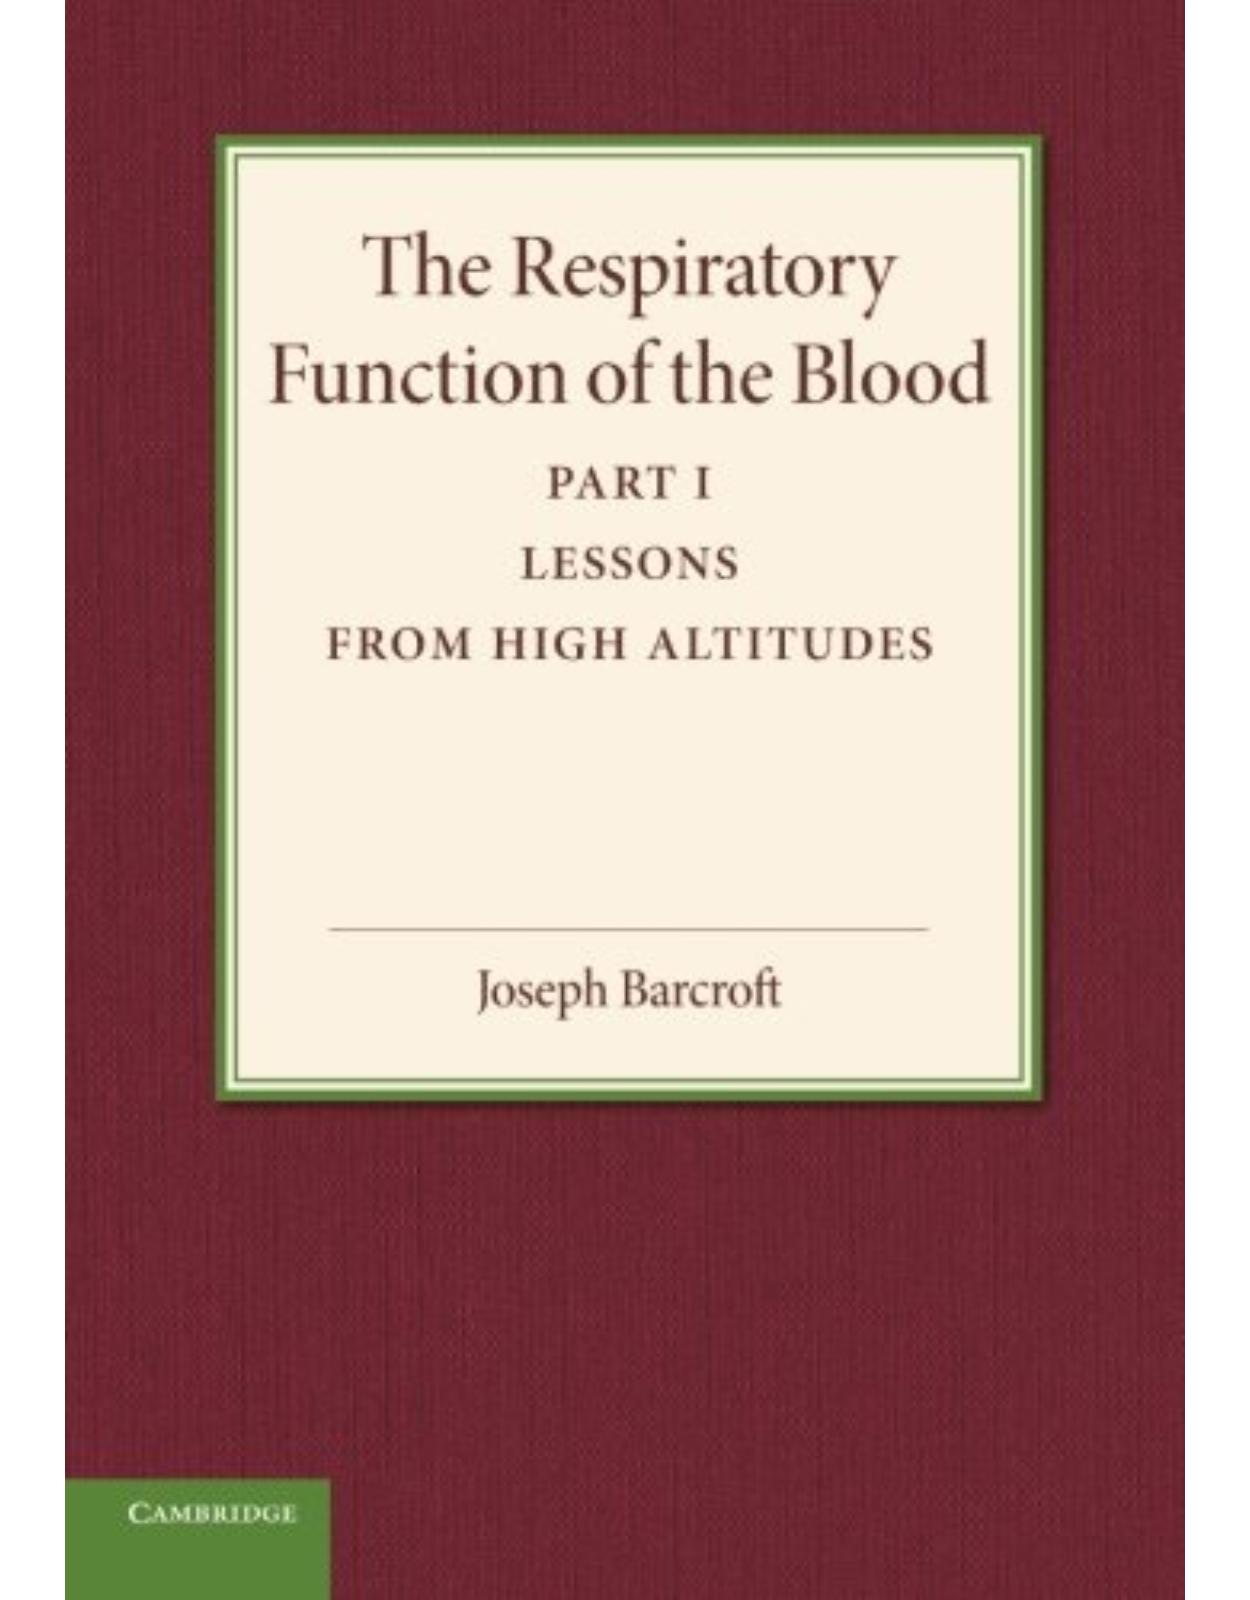 The Respiratory Function of the Blood, Part 1, Lessons from High Altitudes